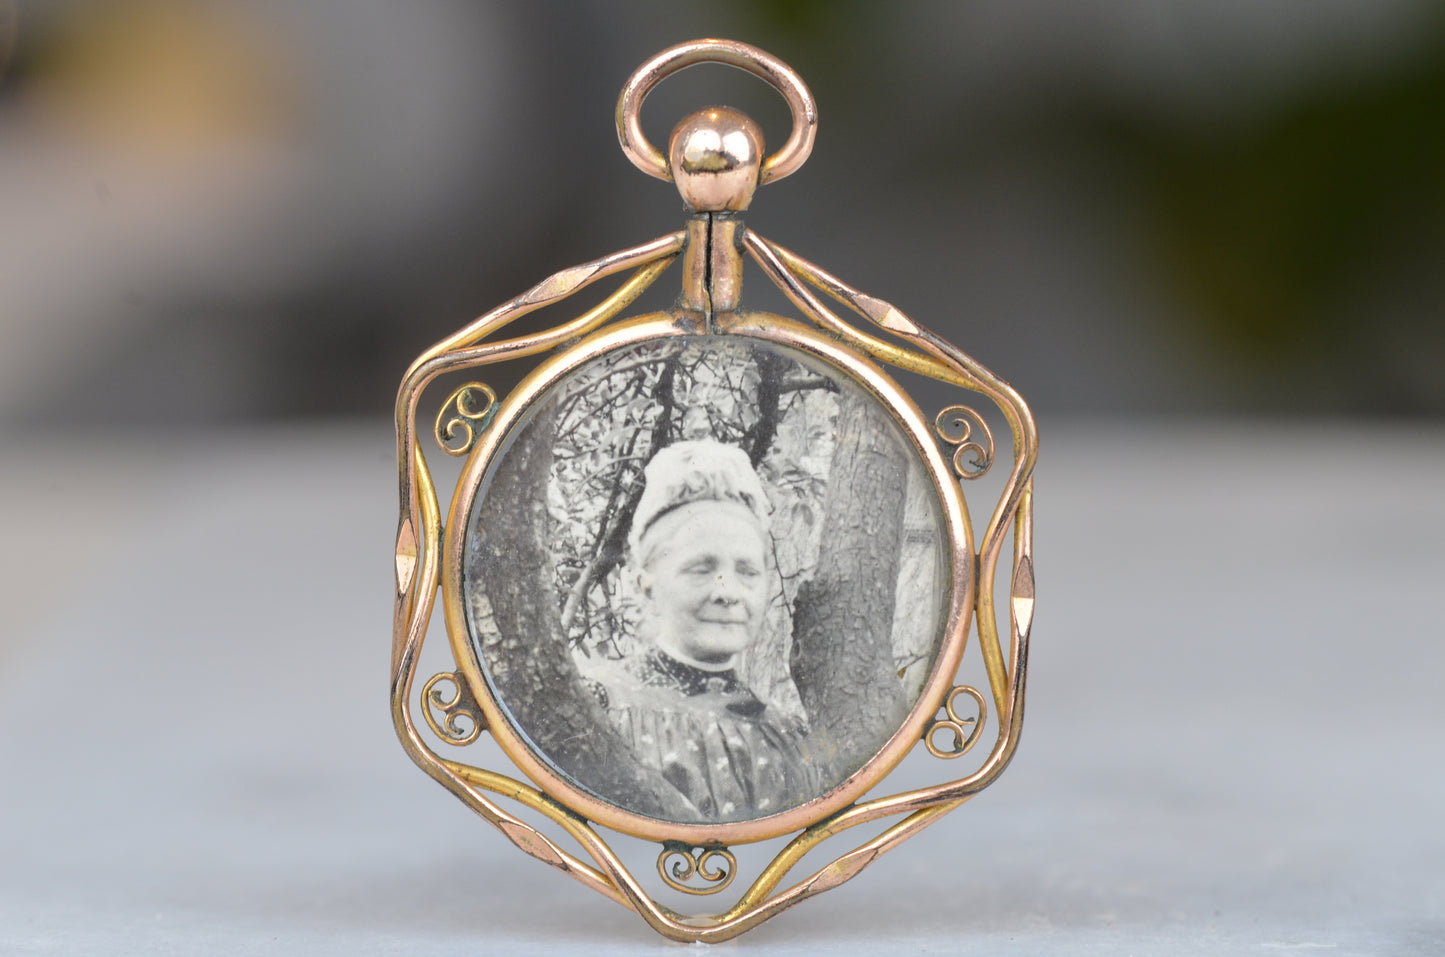 Ornate Antique Double Sided Locket